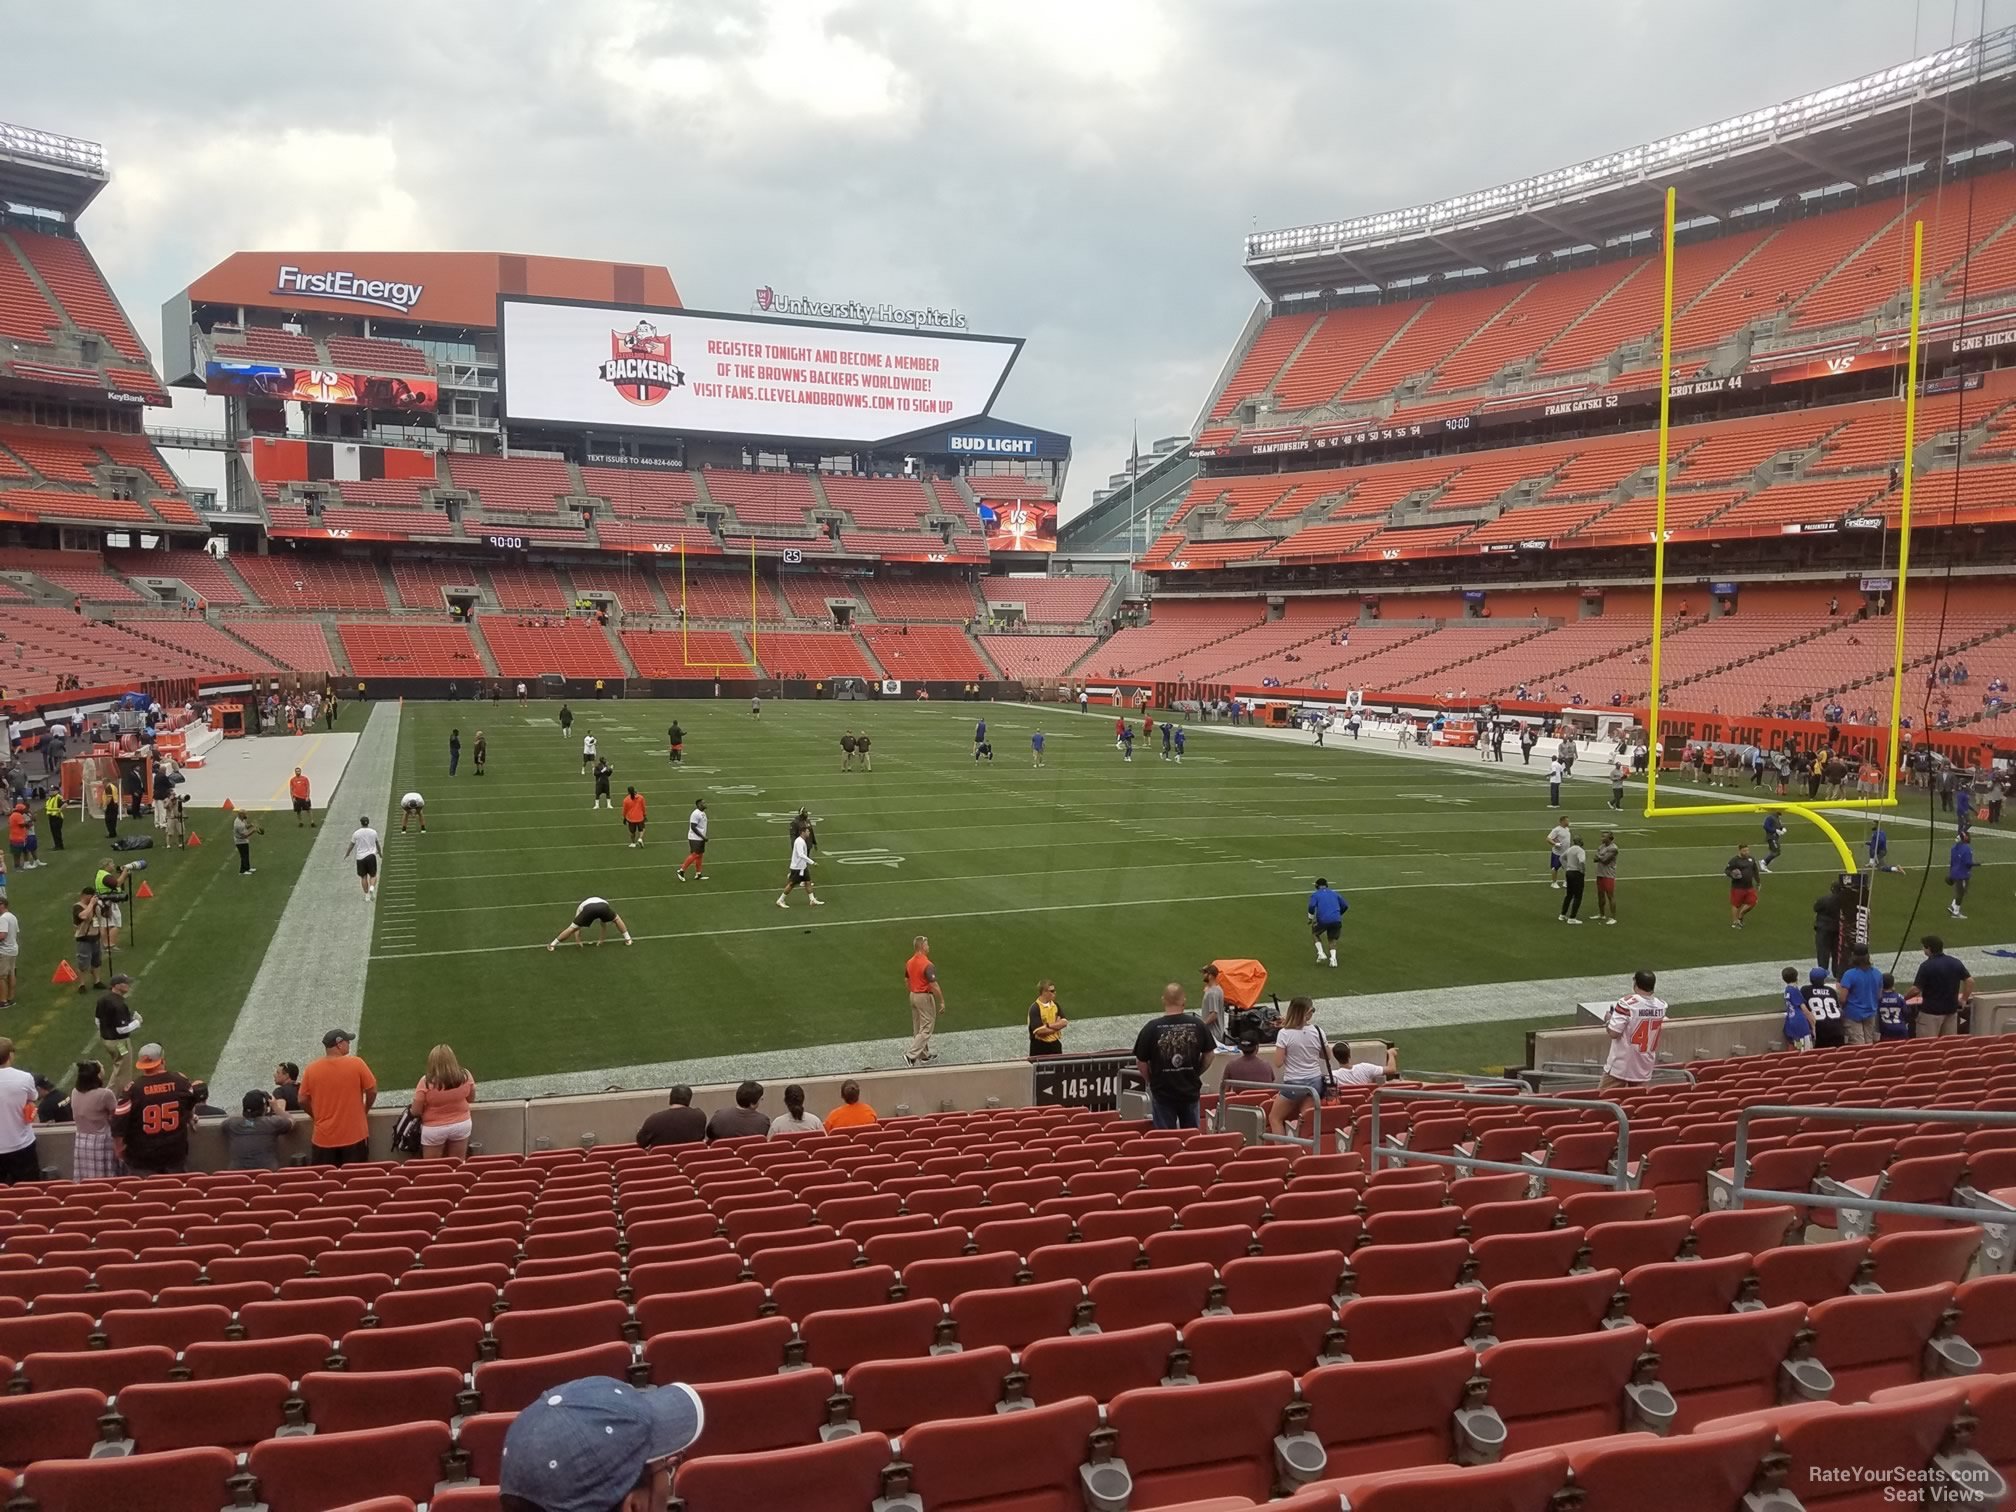 section 145, row 17 seat view  - cleveland browns stadium